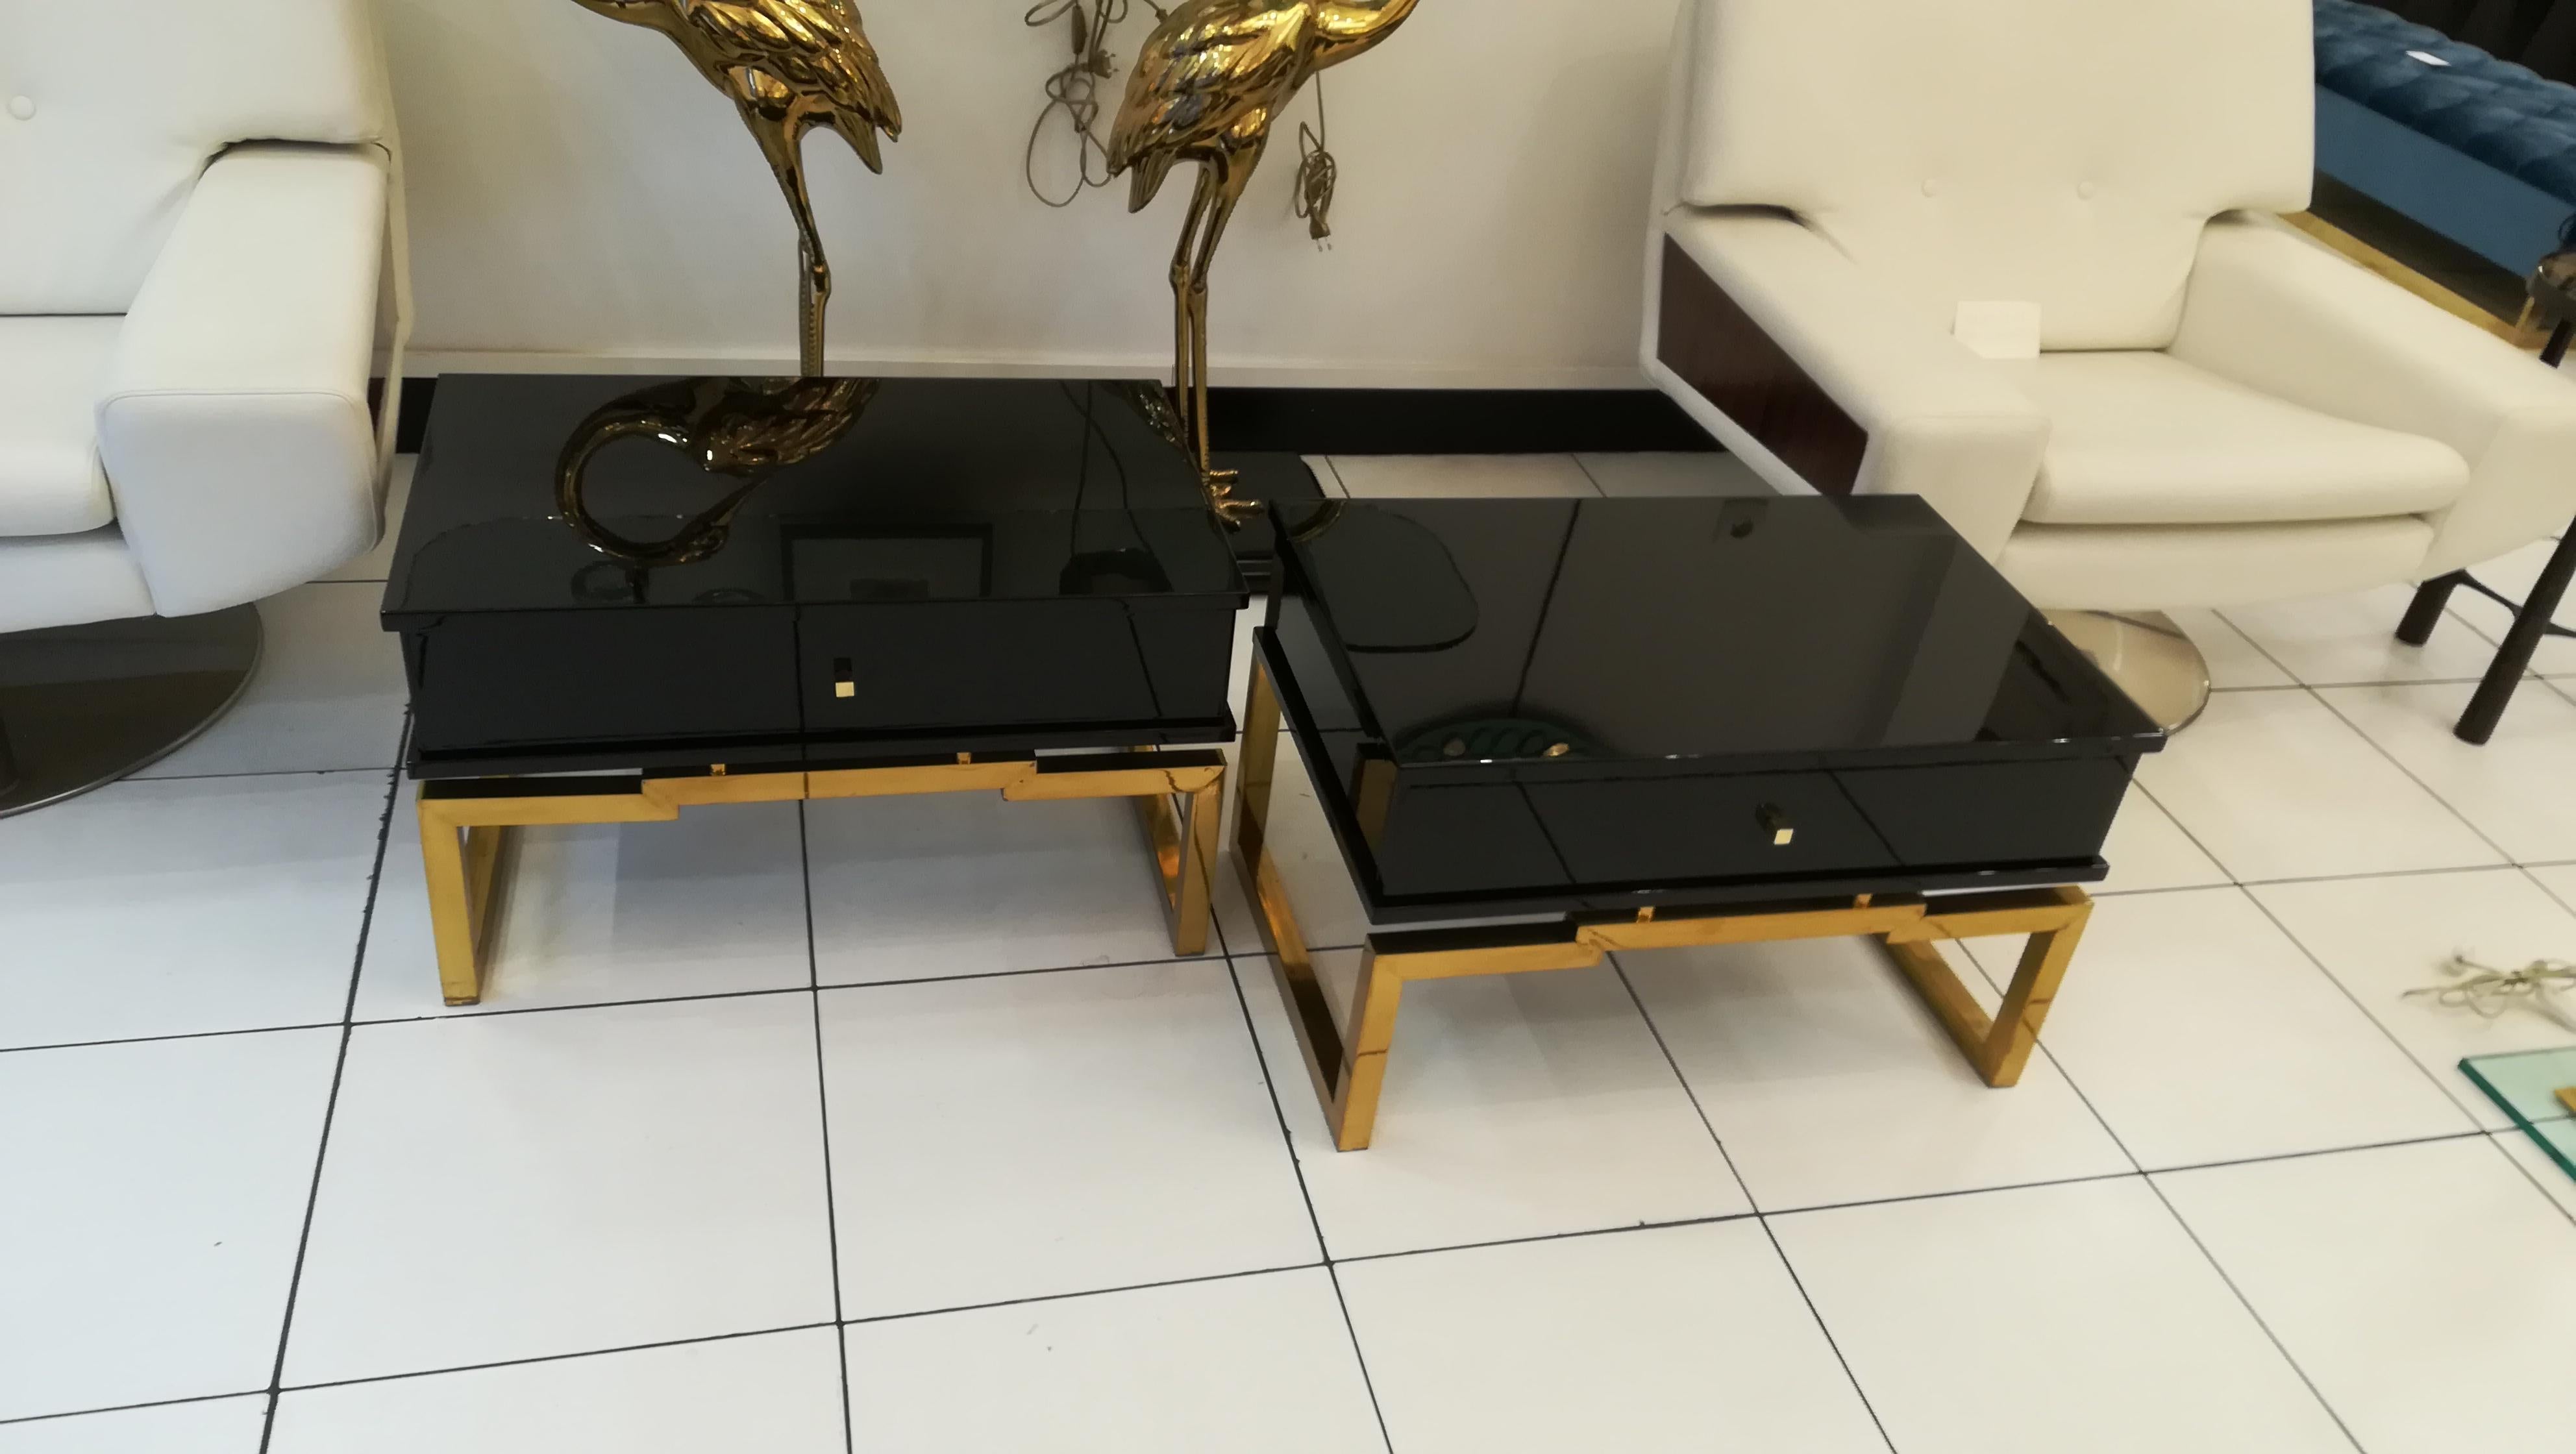 French Pair of Bedsides or End Tables in Lacquered Wood, circa 1970 By Mario Sabot